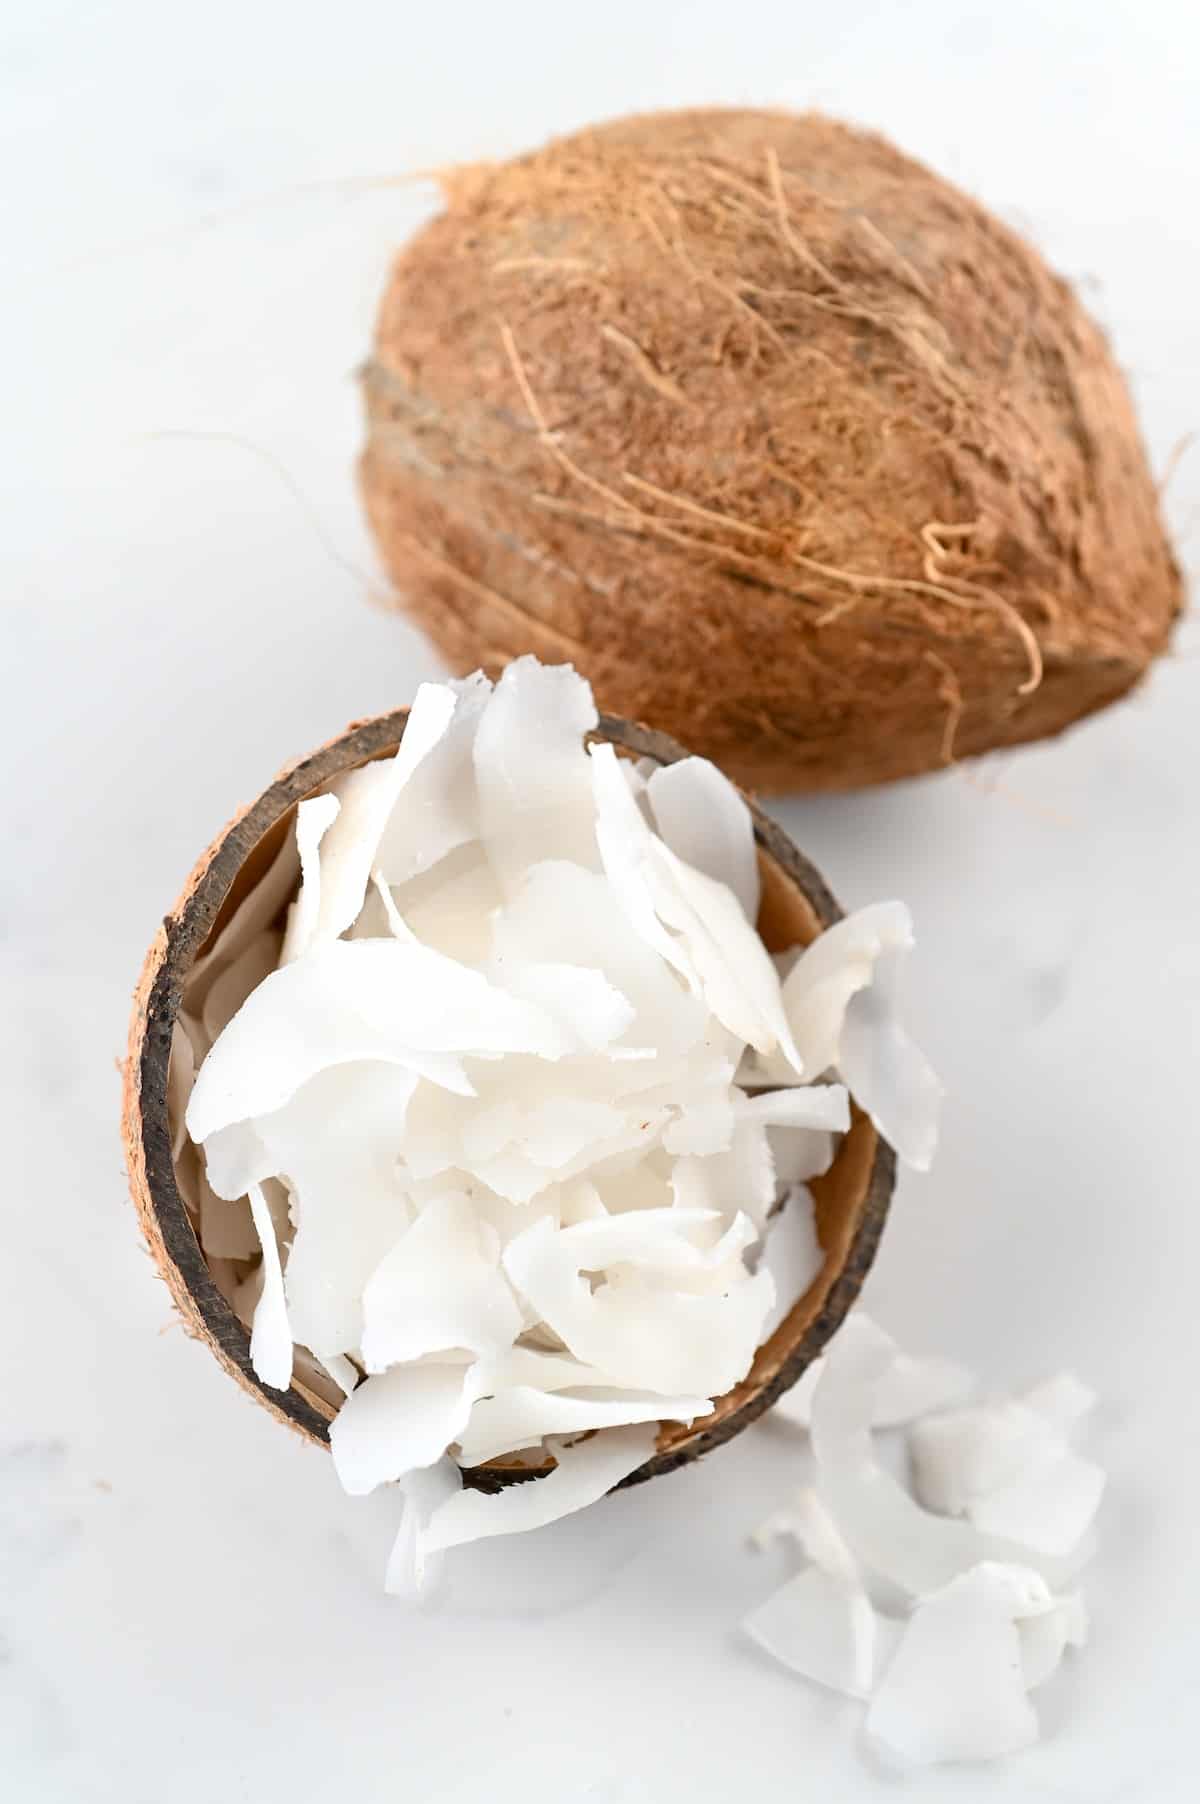 Coconut chips in a small coconut bowl and a whole coconut next to it